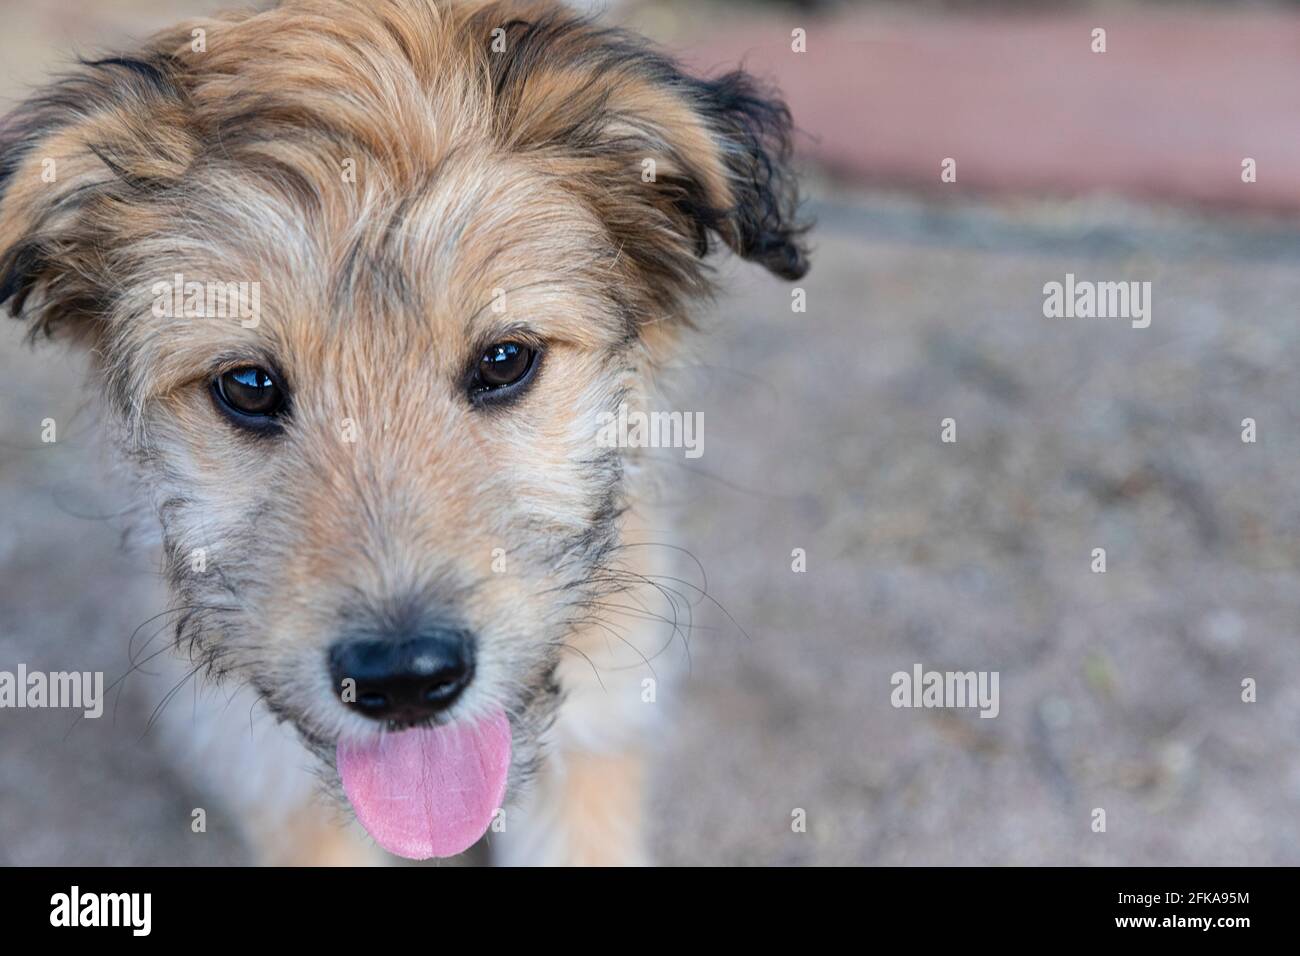 Cute mixed breed poodle puppy Stock Photo